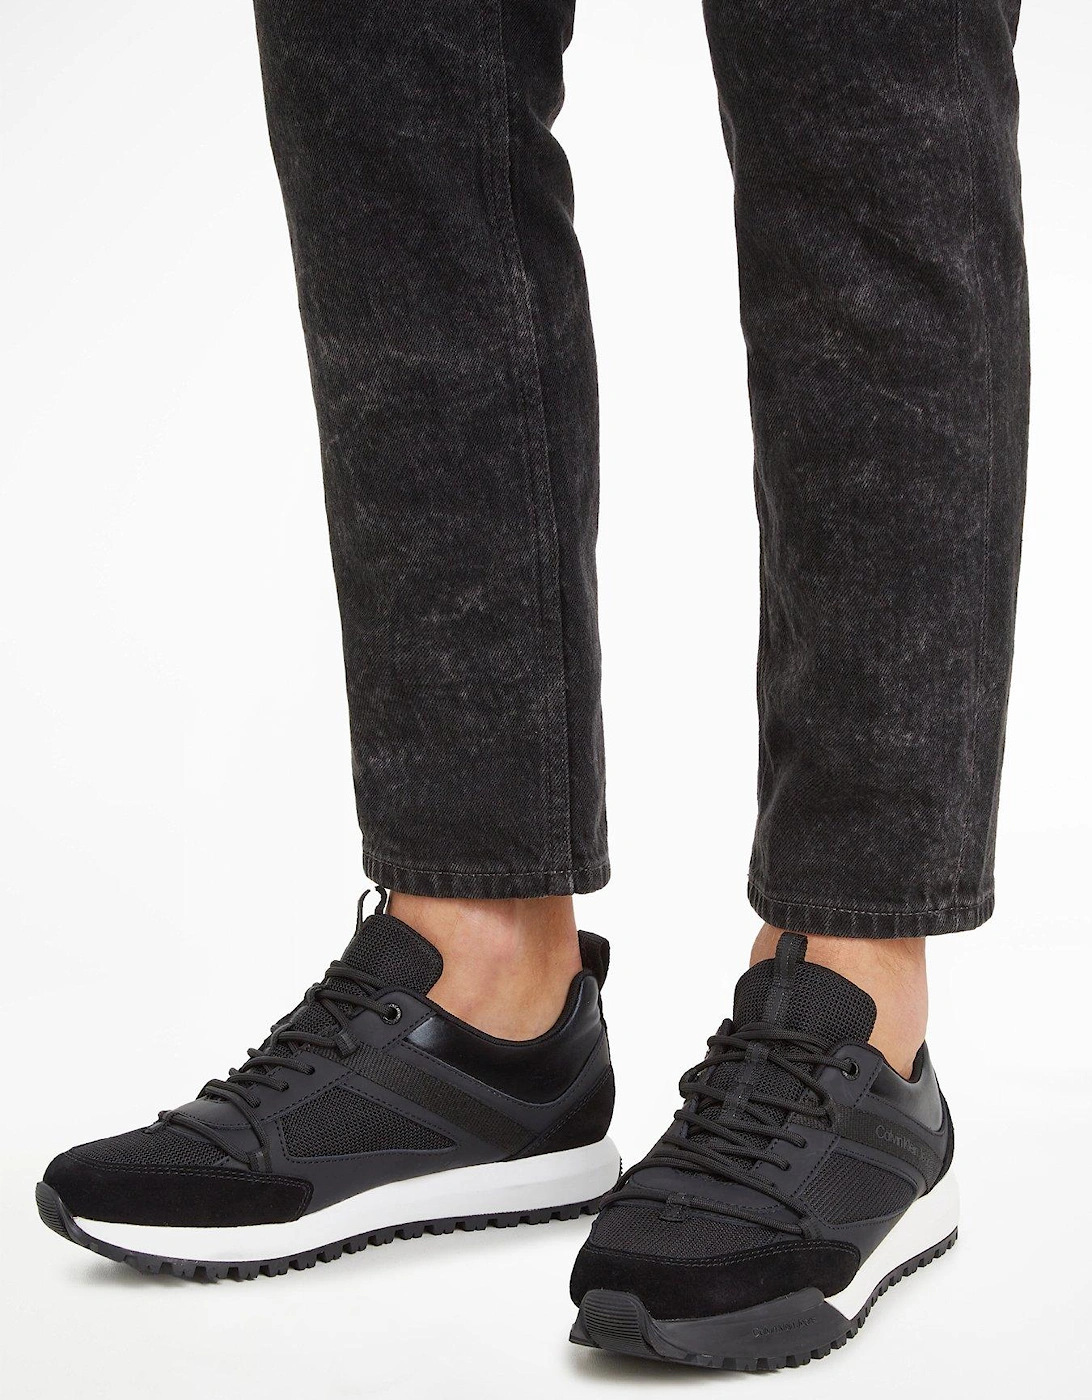 Toothy Runner Low Laceup Mix - Black/White